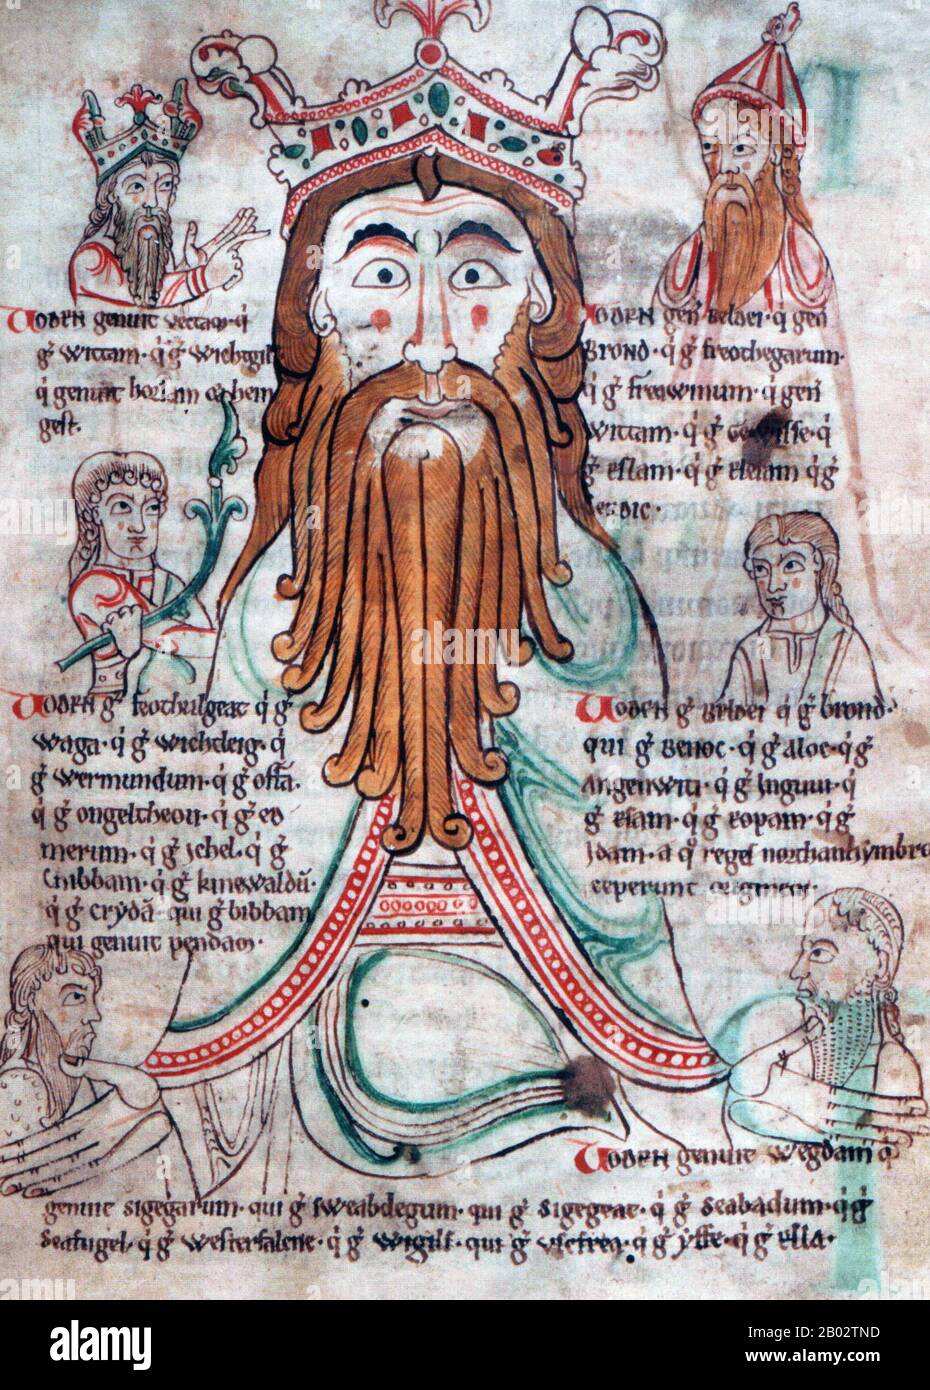 The Libellus de primo Saxonum uel Normannorum adventu, located in a 12th-century manuscript (London, British Library Cotton Caligula A. viii) and often attributed to Symeon of Durham, contains an illustration of Odin as Woden, crowned as ancestral king of the Anglo-Saxons.  The text surrounding the illustration describes the royal lineages of the kingdoms of Kent, Mercia, Deira, Bernicia and Wessex respectively, each claiming descent and the right to rule from this legendary figure. Stock Photo